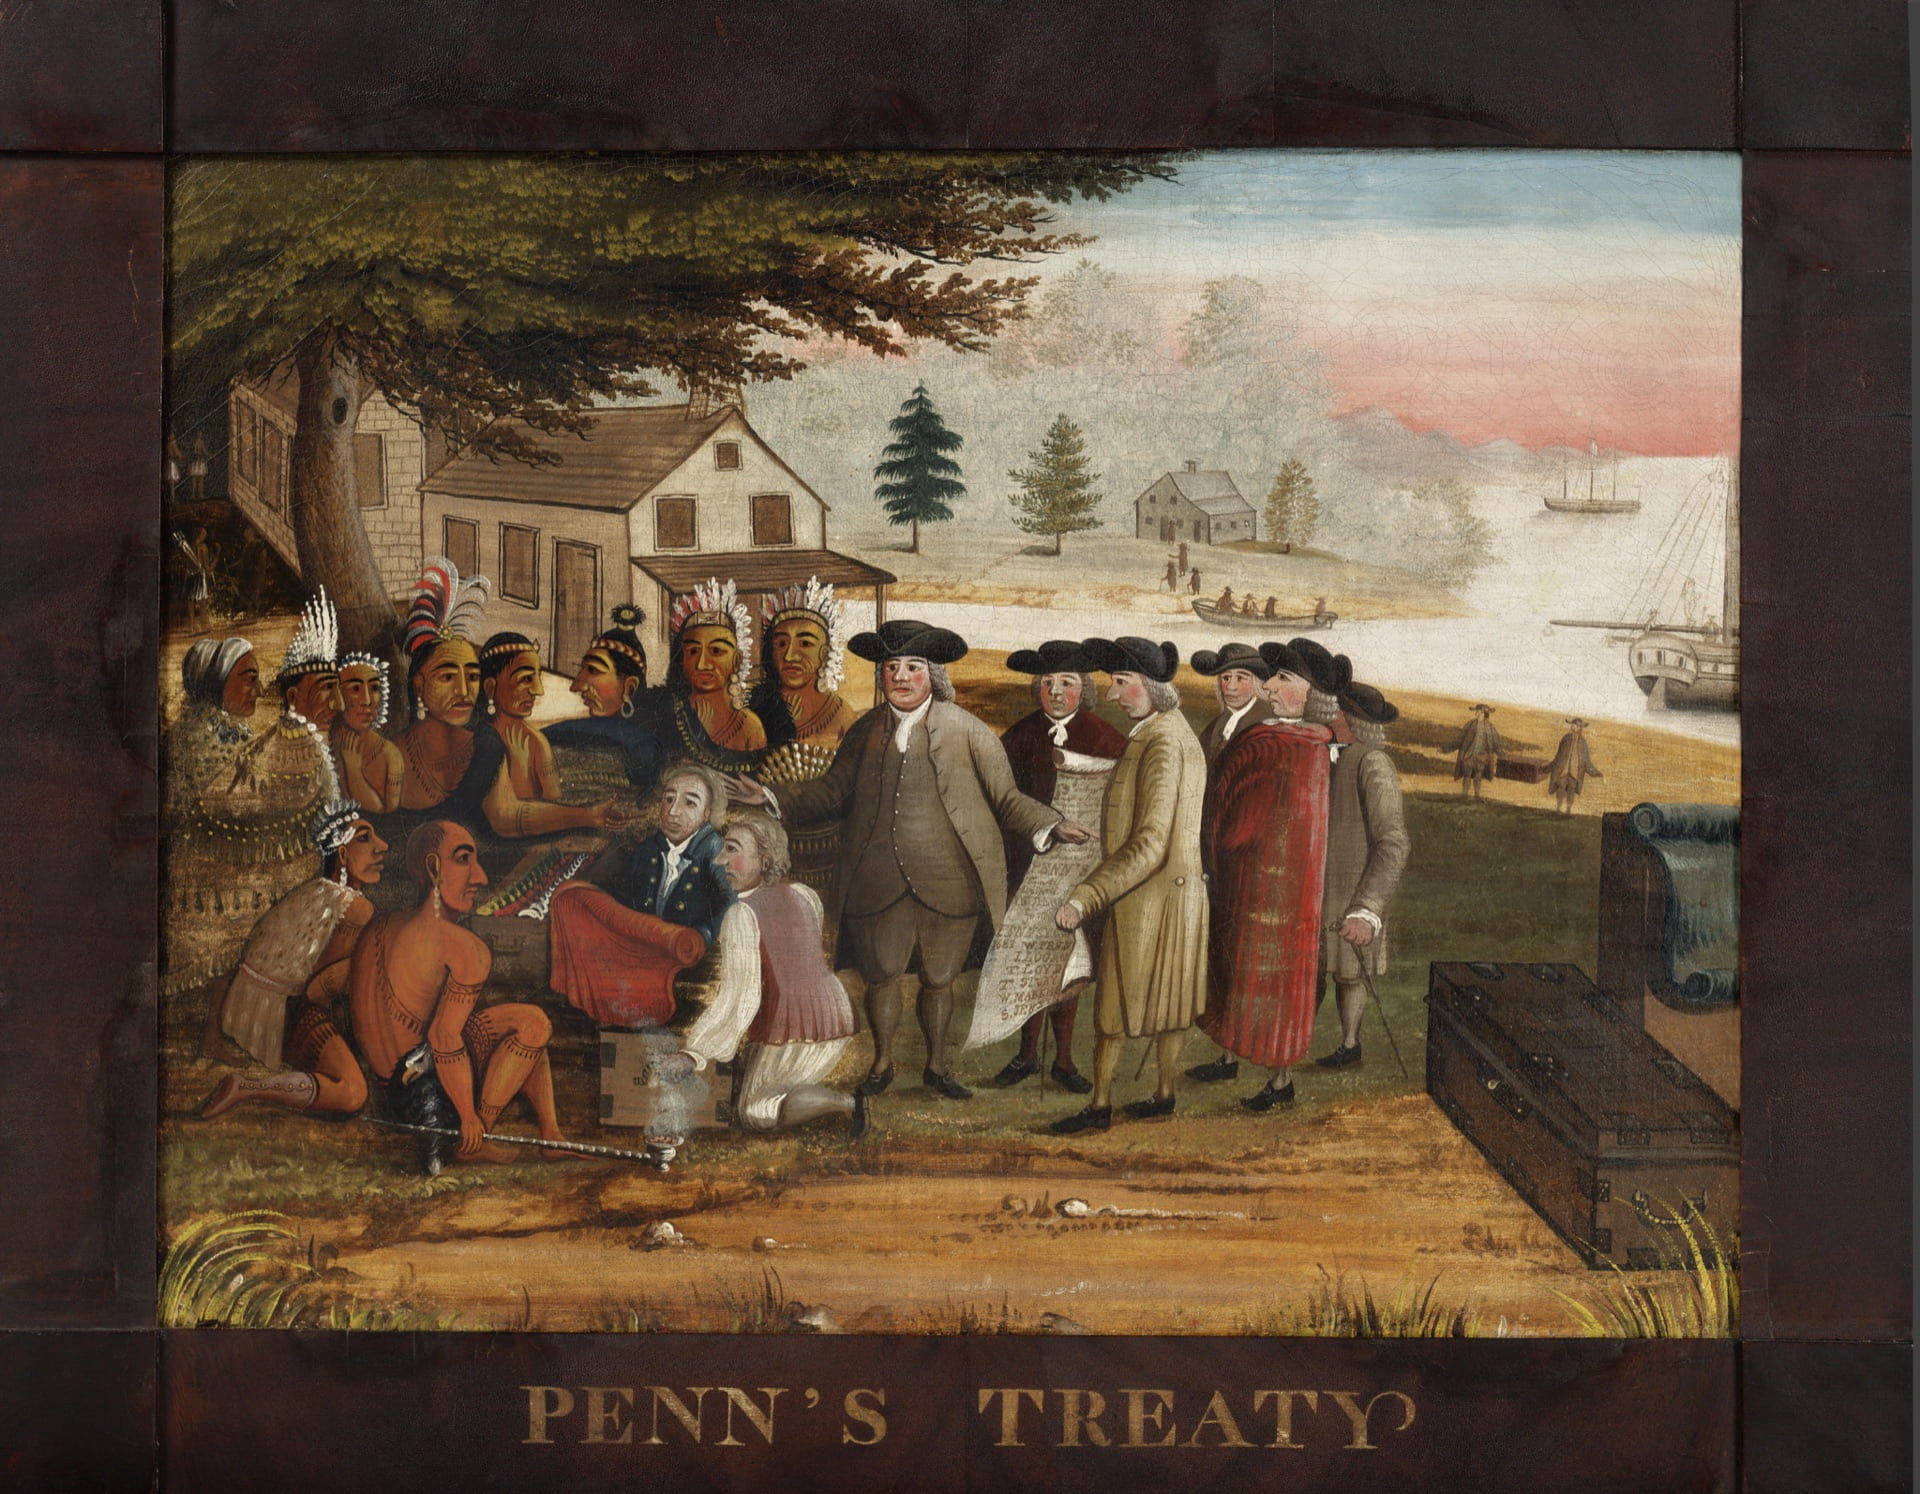 An image depicting colonial men engaging in treaty making with a Native American tribe